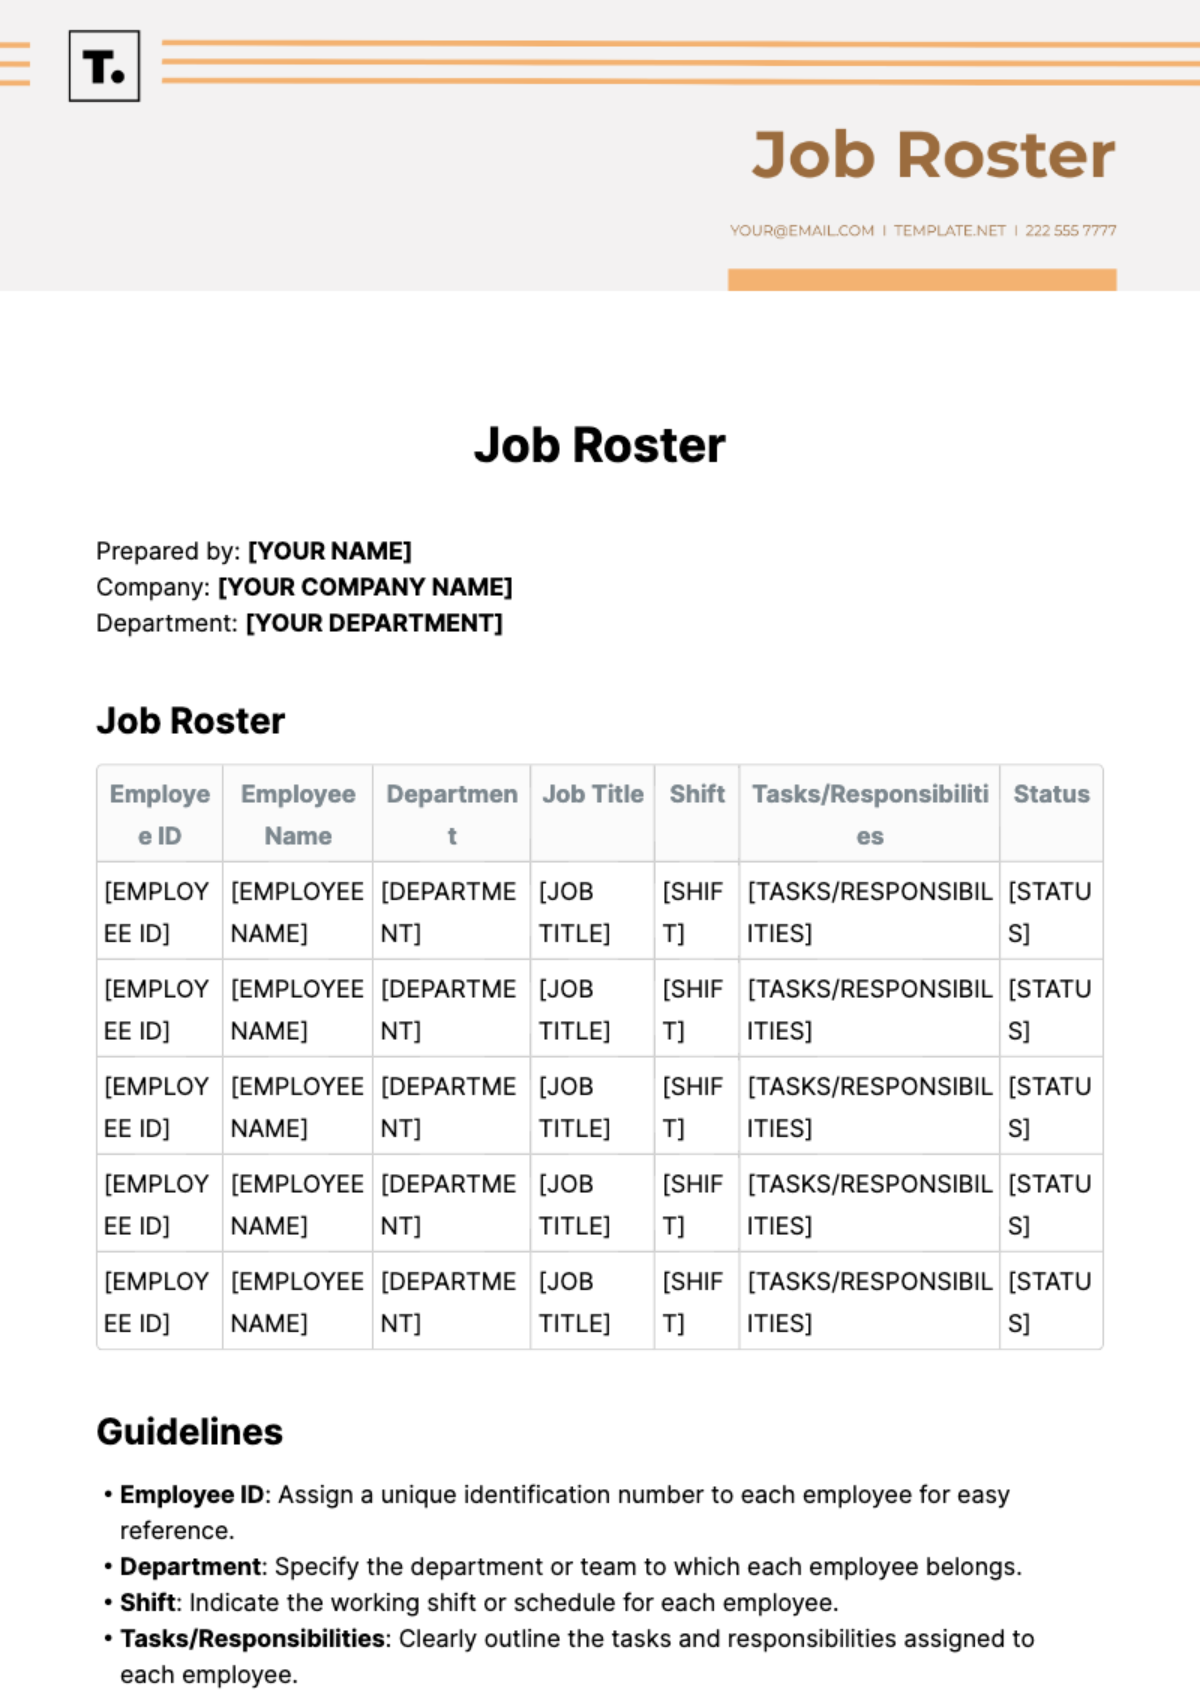 Job Roster Template